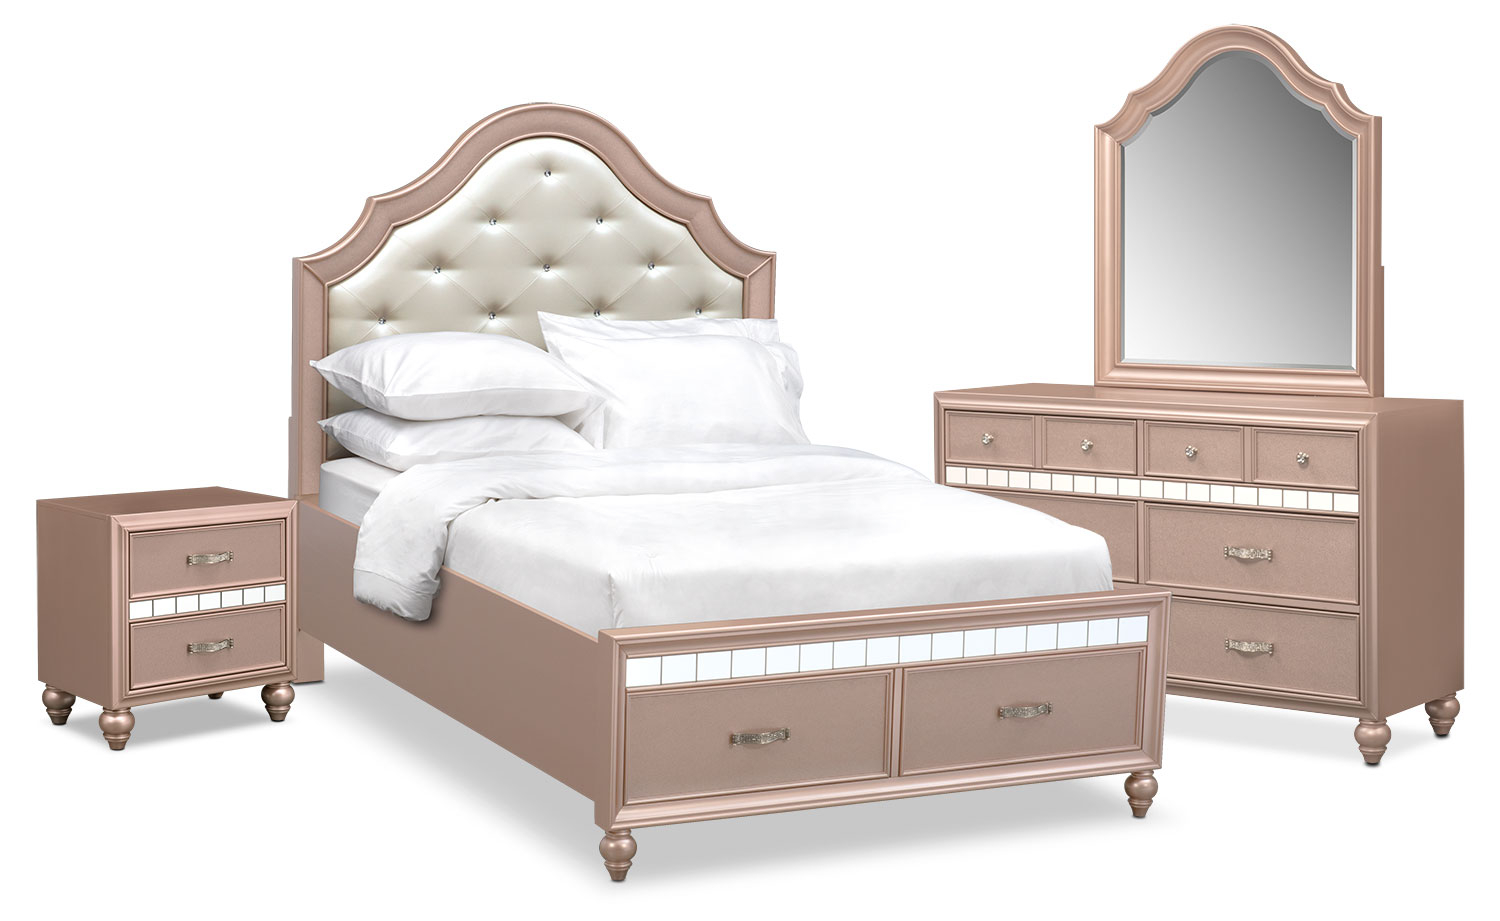 Serena Youth 6 Piece Storage Bedroom Set With Nightstand Dresser And Mirror within measurements 1500 X 921